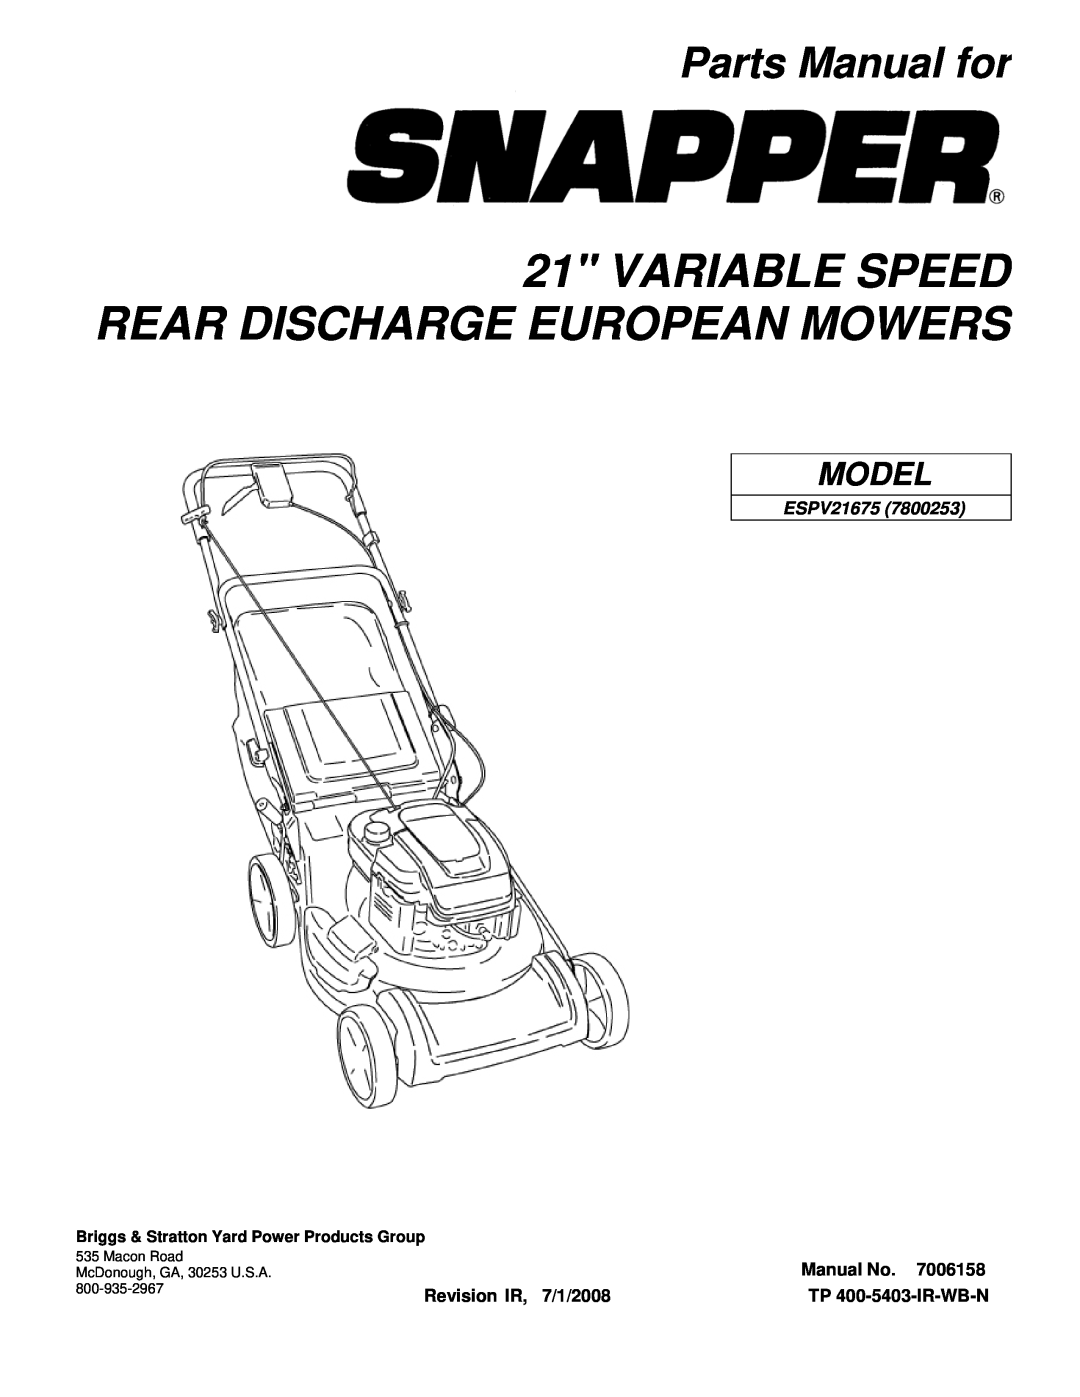 Snapper ESPV21675 (7800253) manual Variable Speed Rear Discharge European Mowers, Parts Manual for, Manual No, Model 